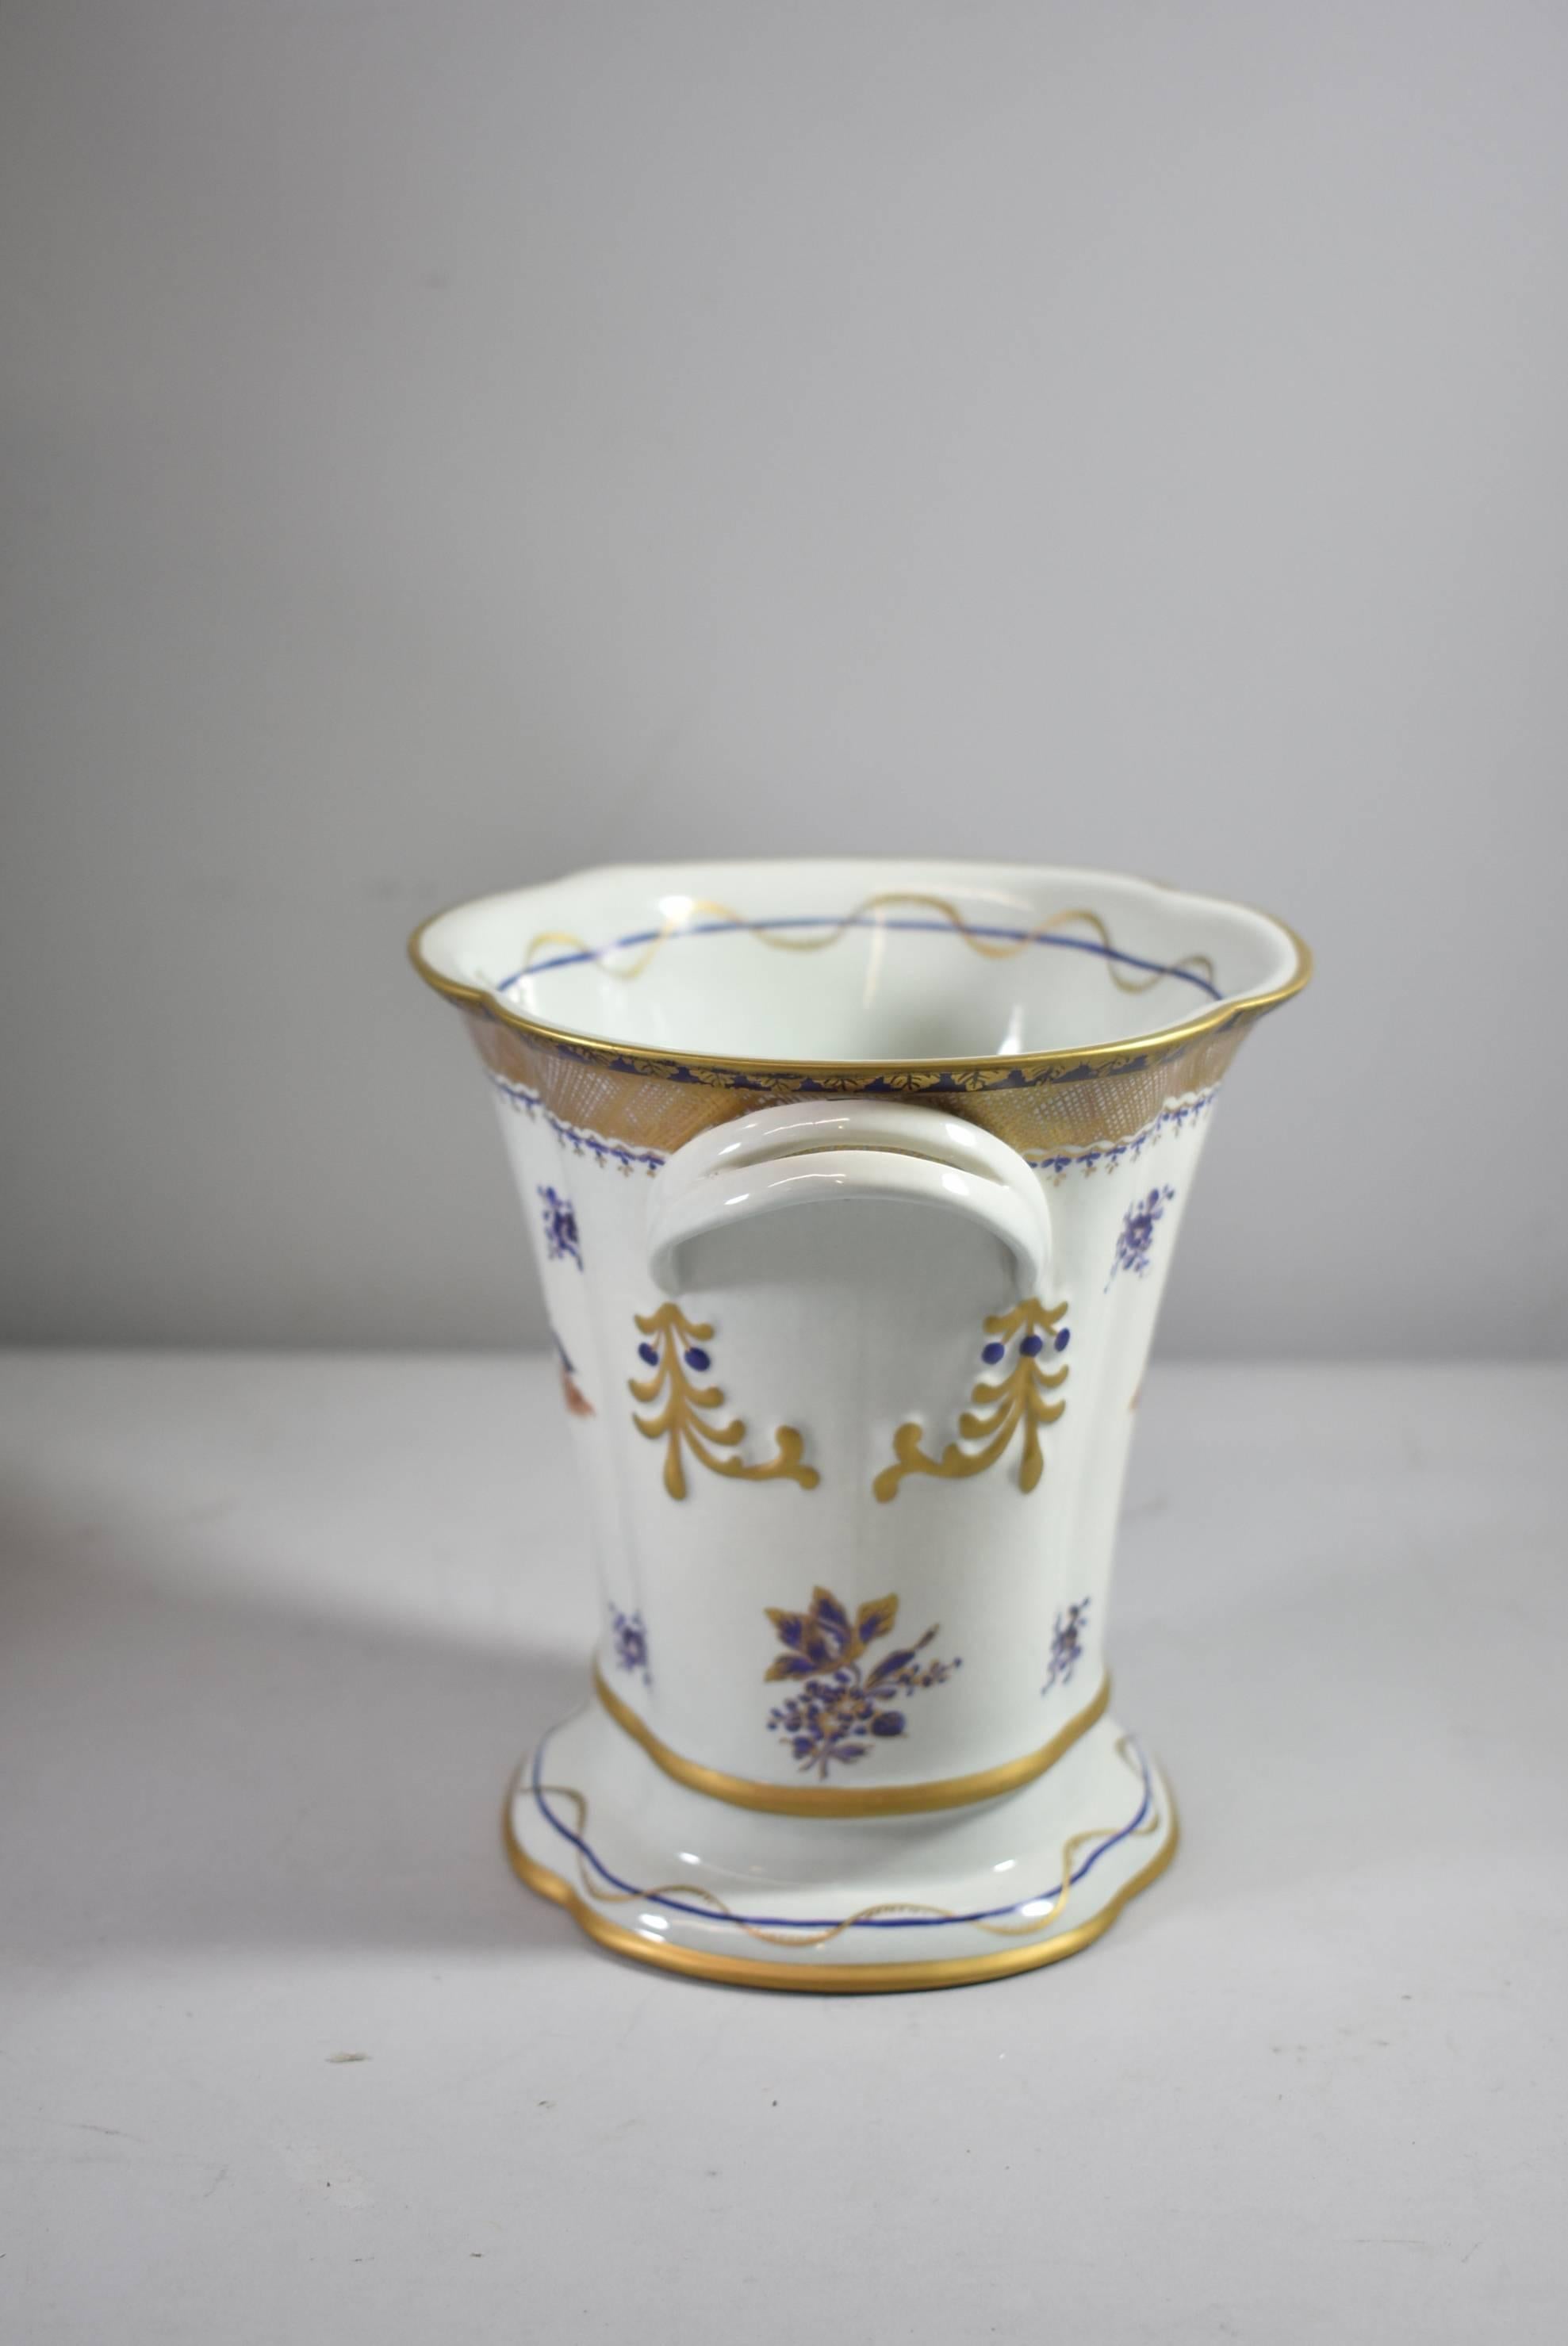 Italian Lowestoft Reproduction Created by Mottahedeh Federal Eagle Porcelain Cachepot